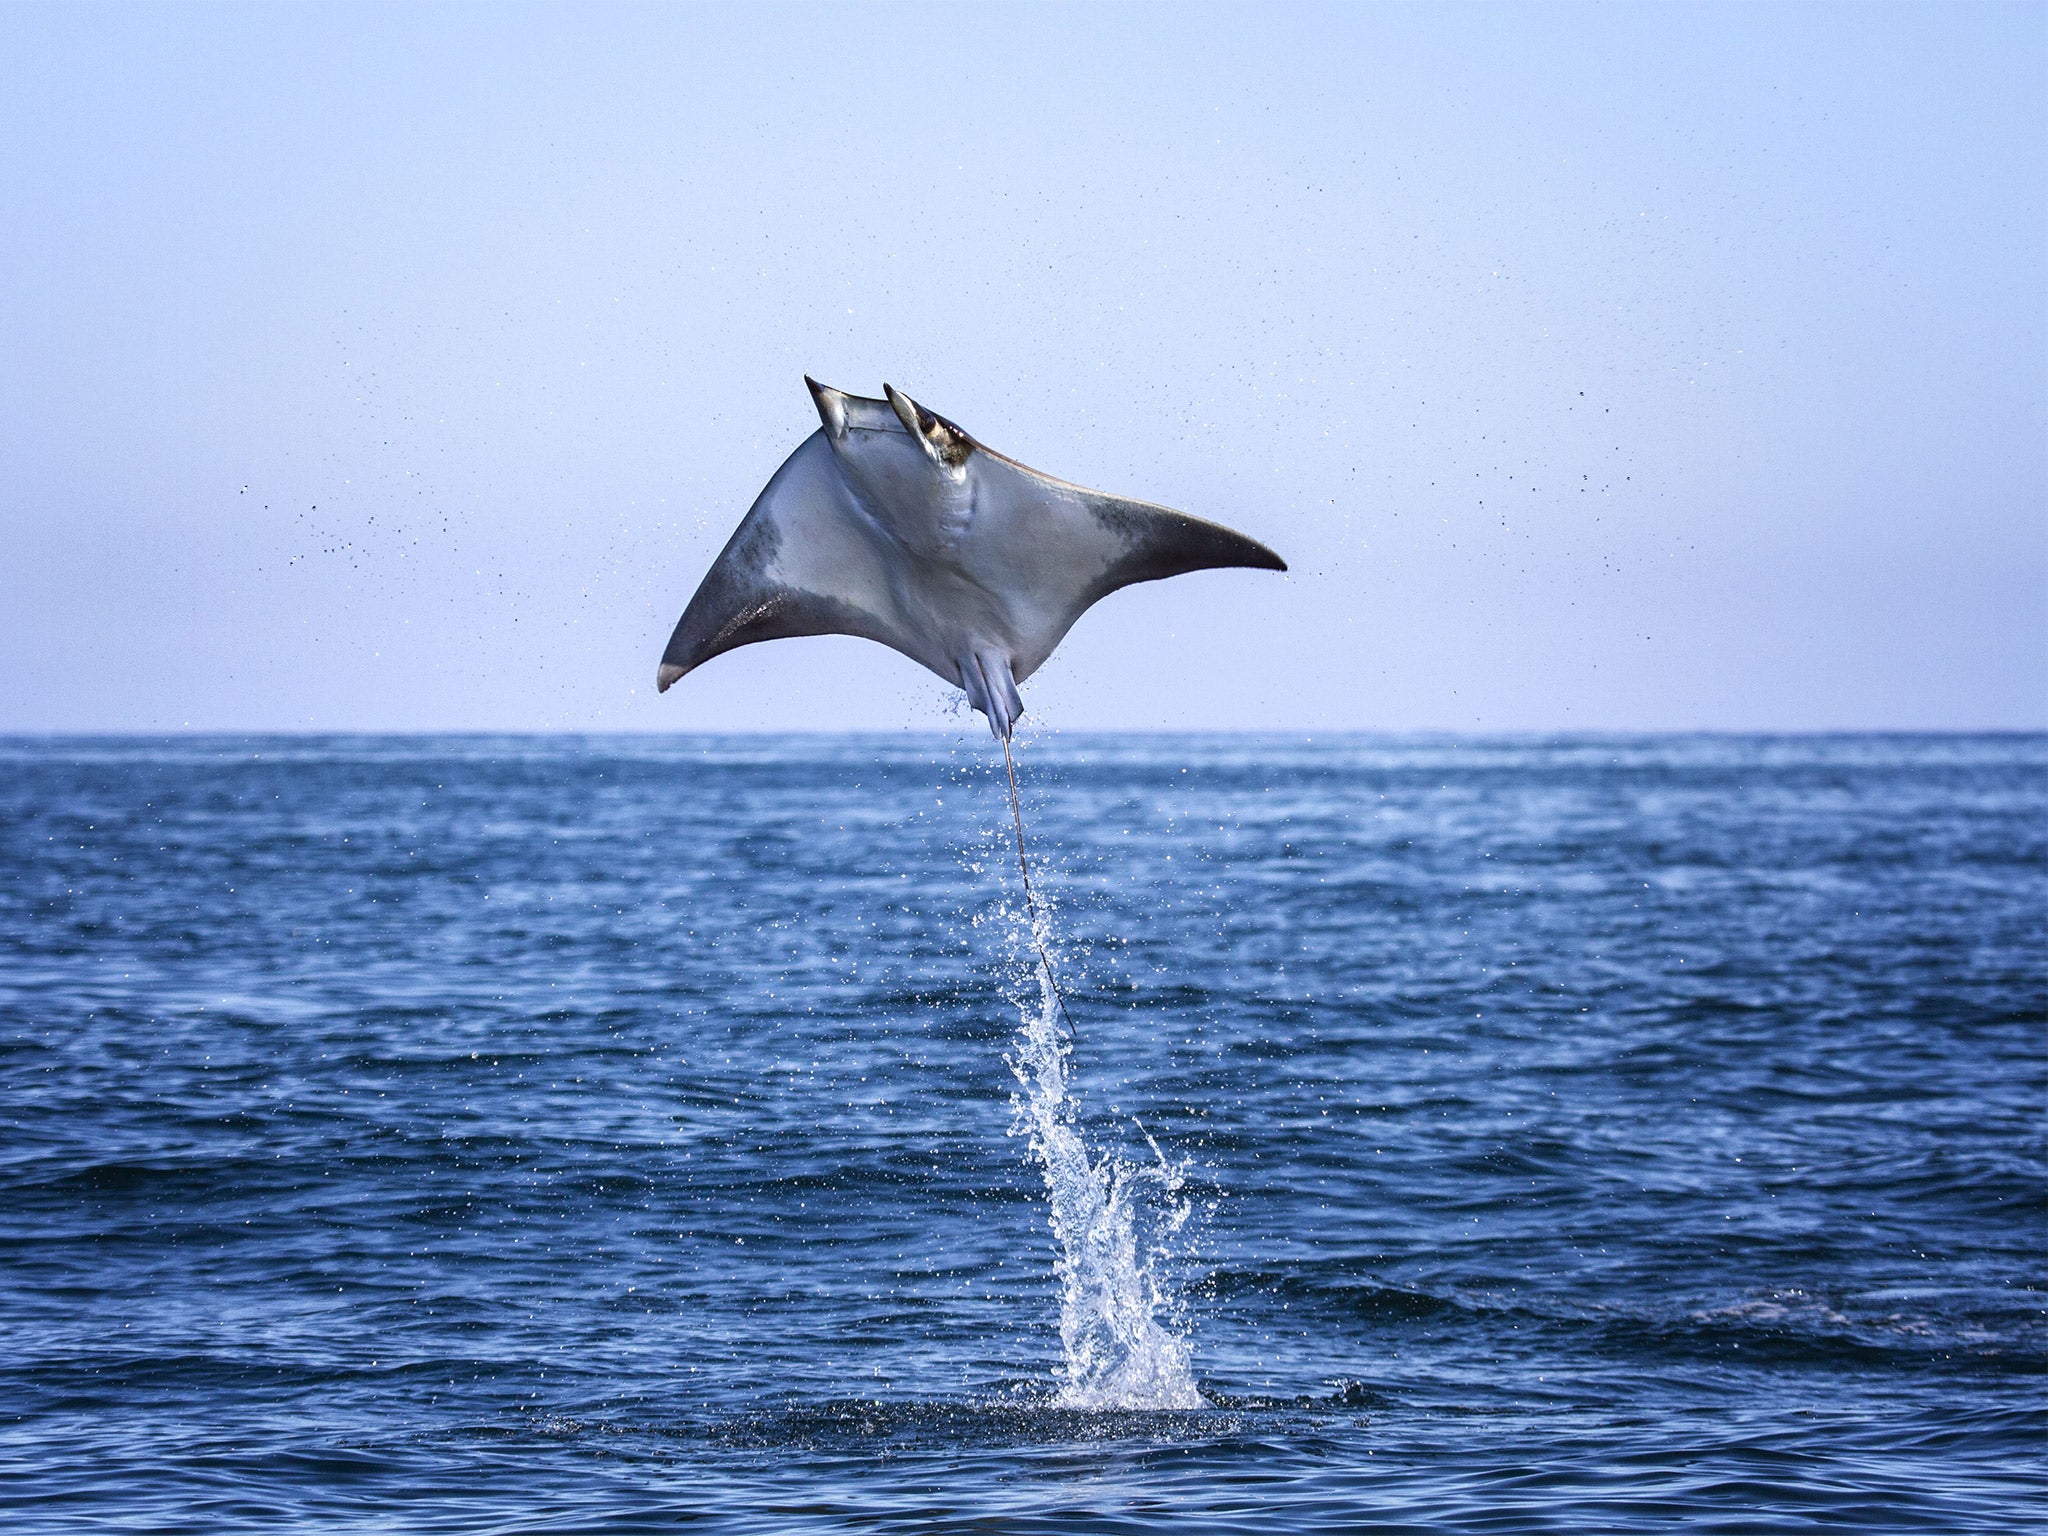 Mobula Ray leap high out of the water, sometimes even doing back flips and somersaults. It is thought the loud belly flop sounds they make help in courtship